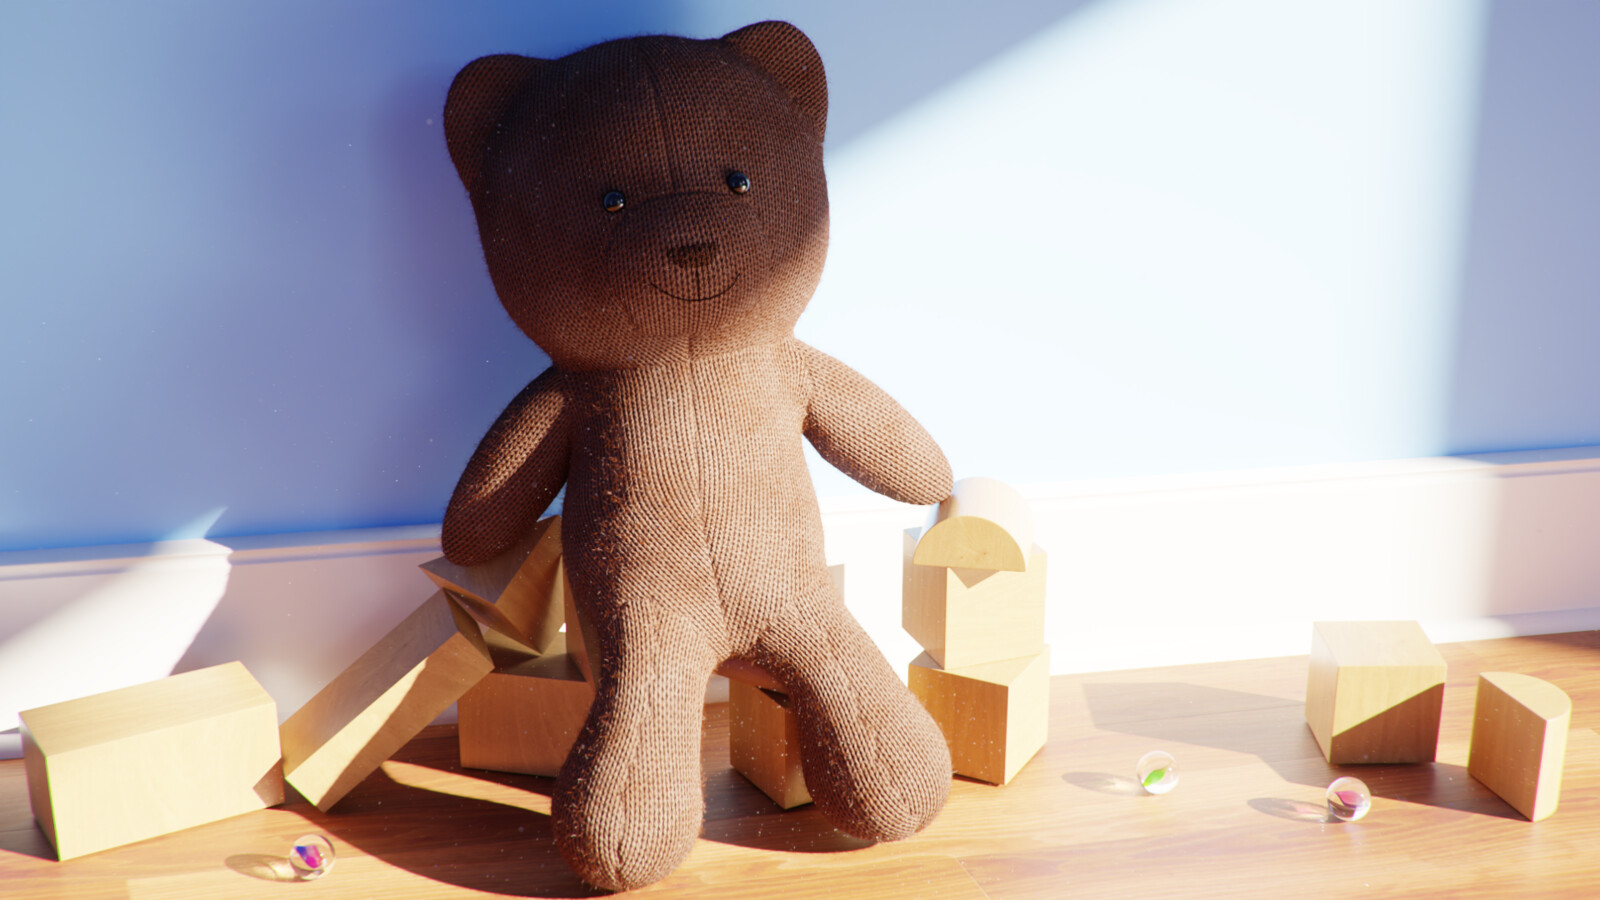 A teddy bear resting against a wall. There are wooden blocks, marbles, and a sunbeam.